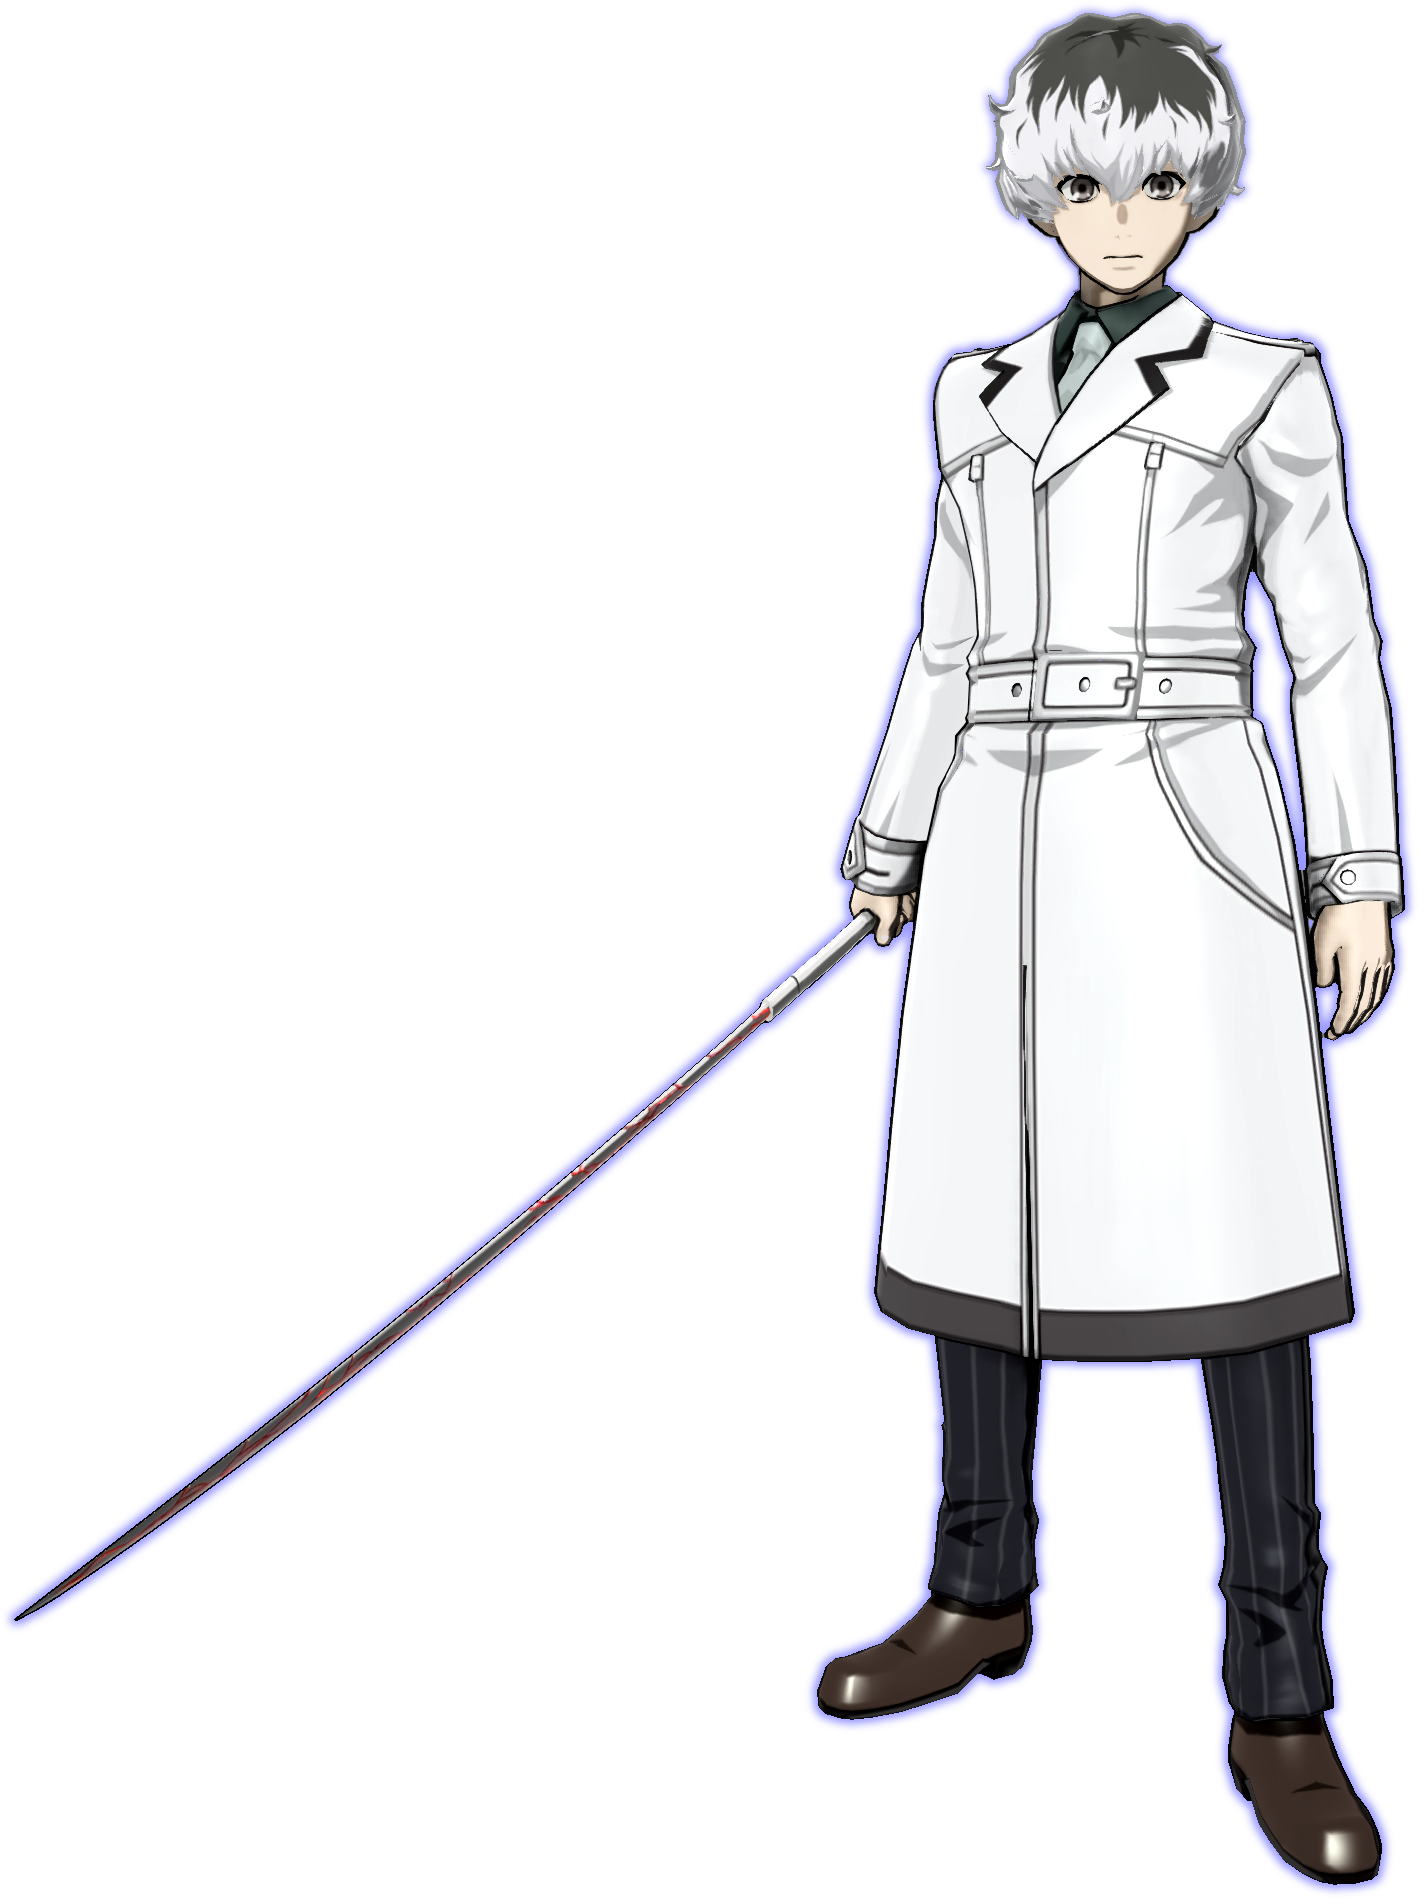 Animated Character With Blue Sword PNG